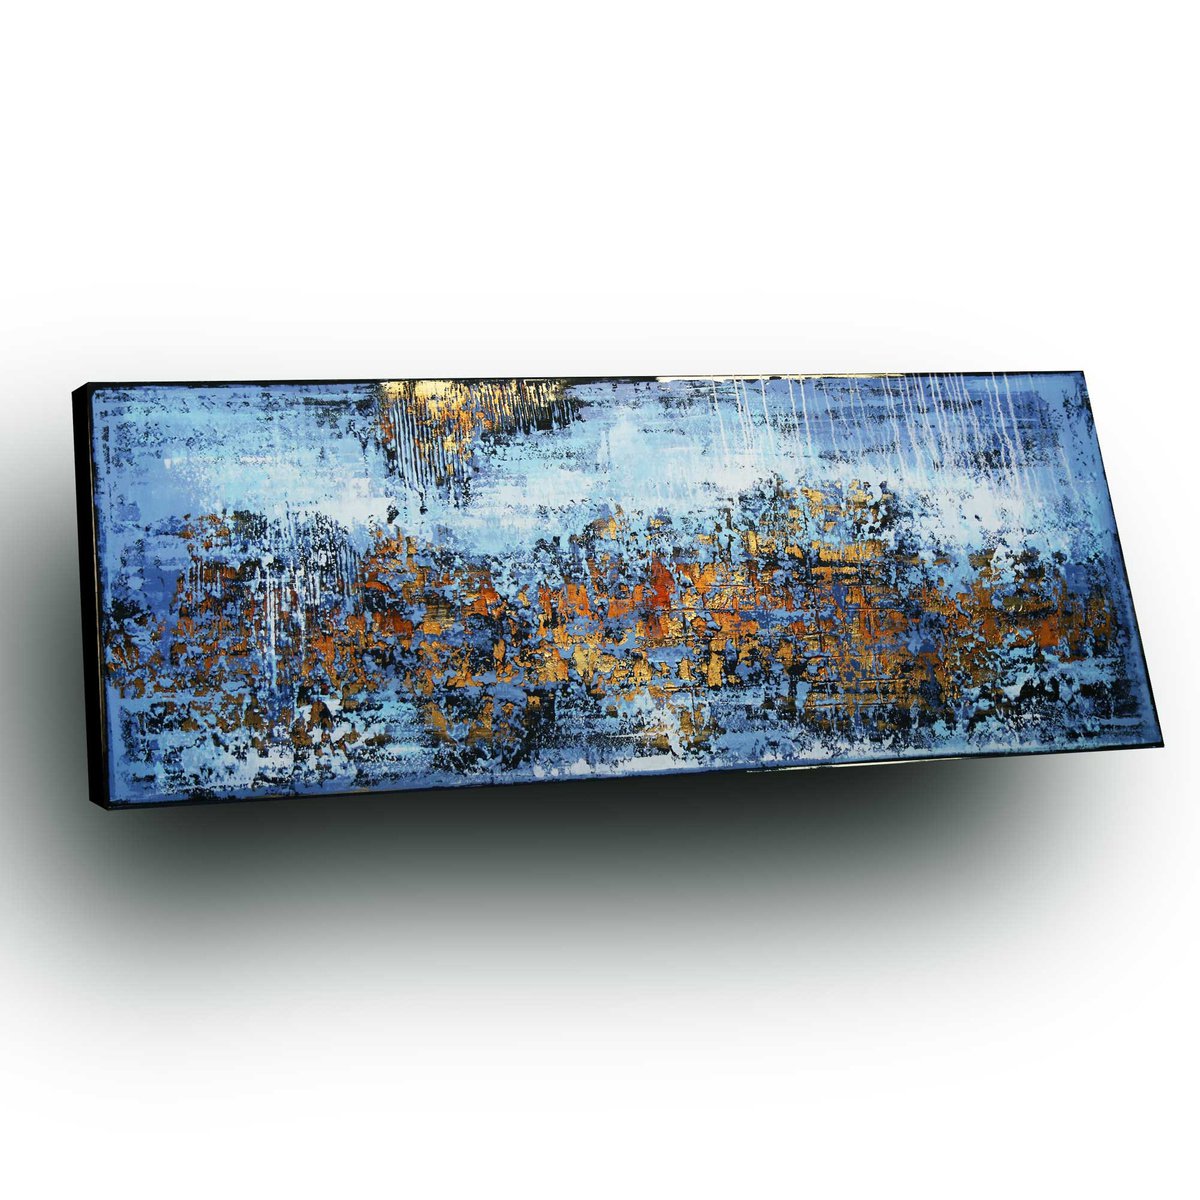 SUNRAYS * 180 x 70 cms * ACRYLIC PAINTING ON CANVAS * WHITE * BLUE * GOLD by Inez Froehlich